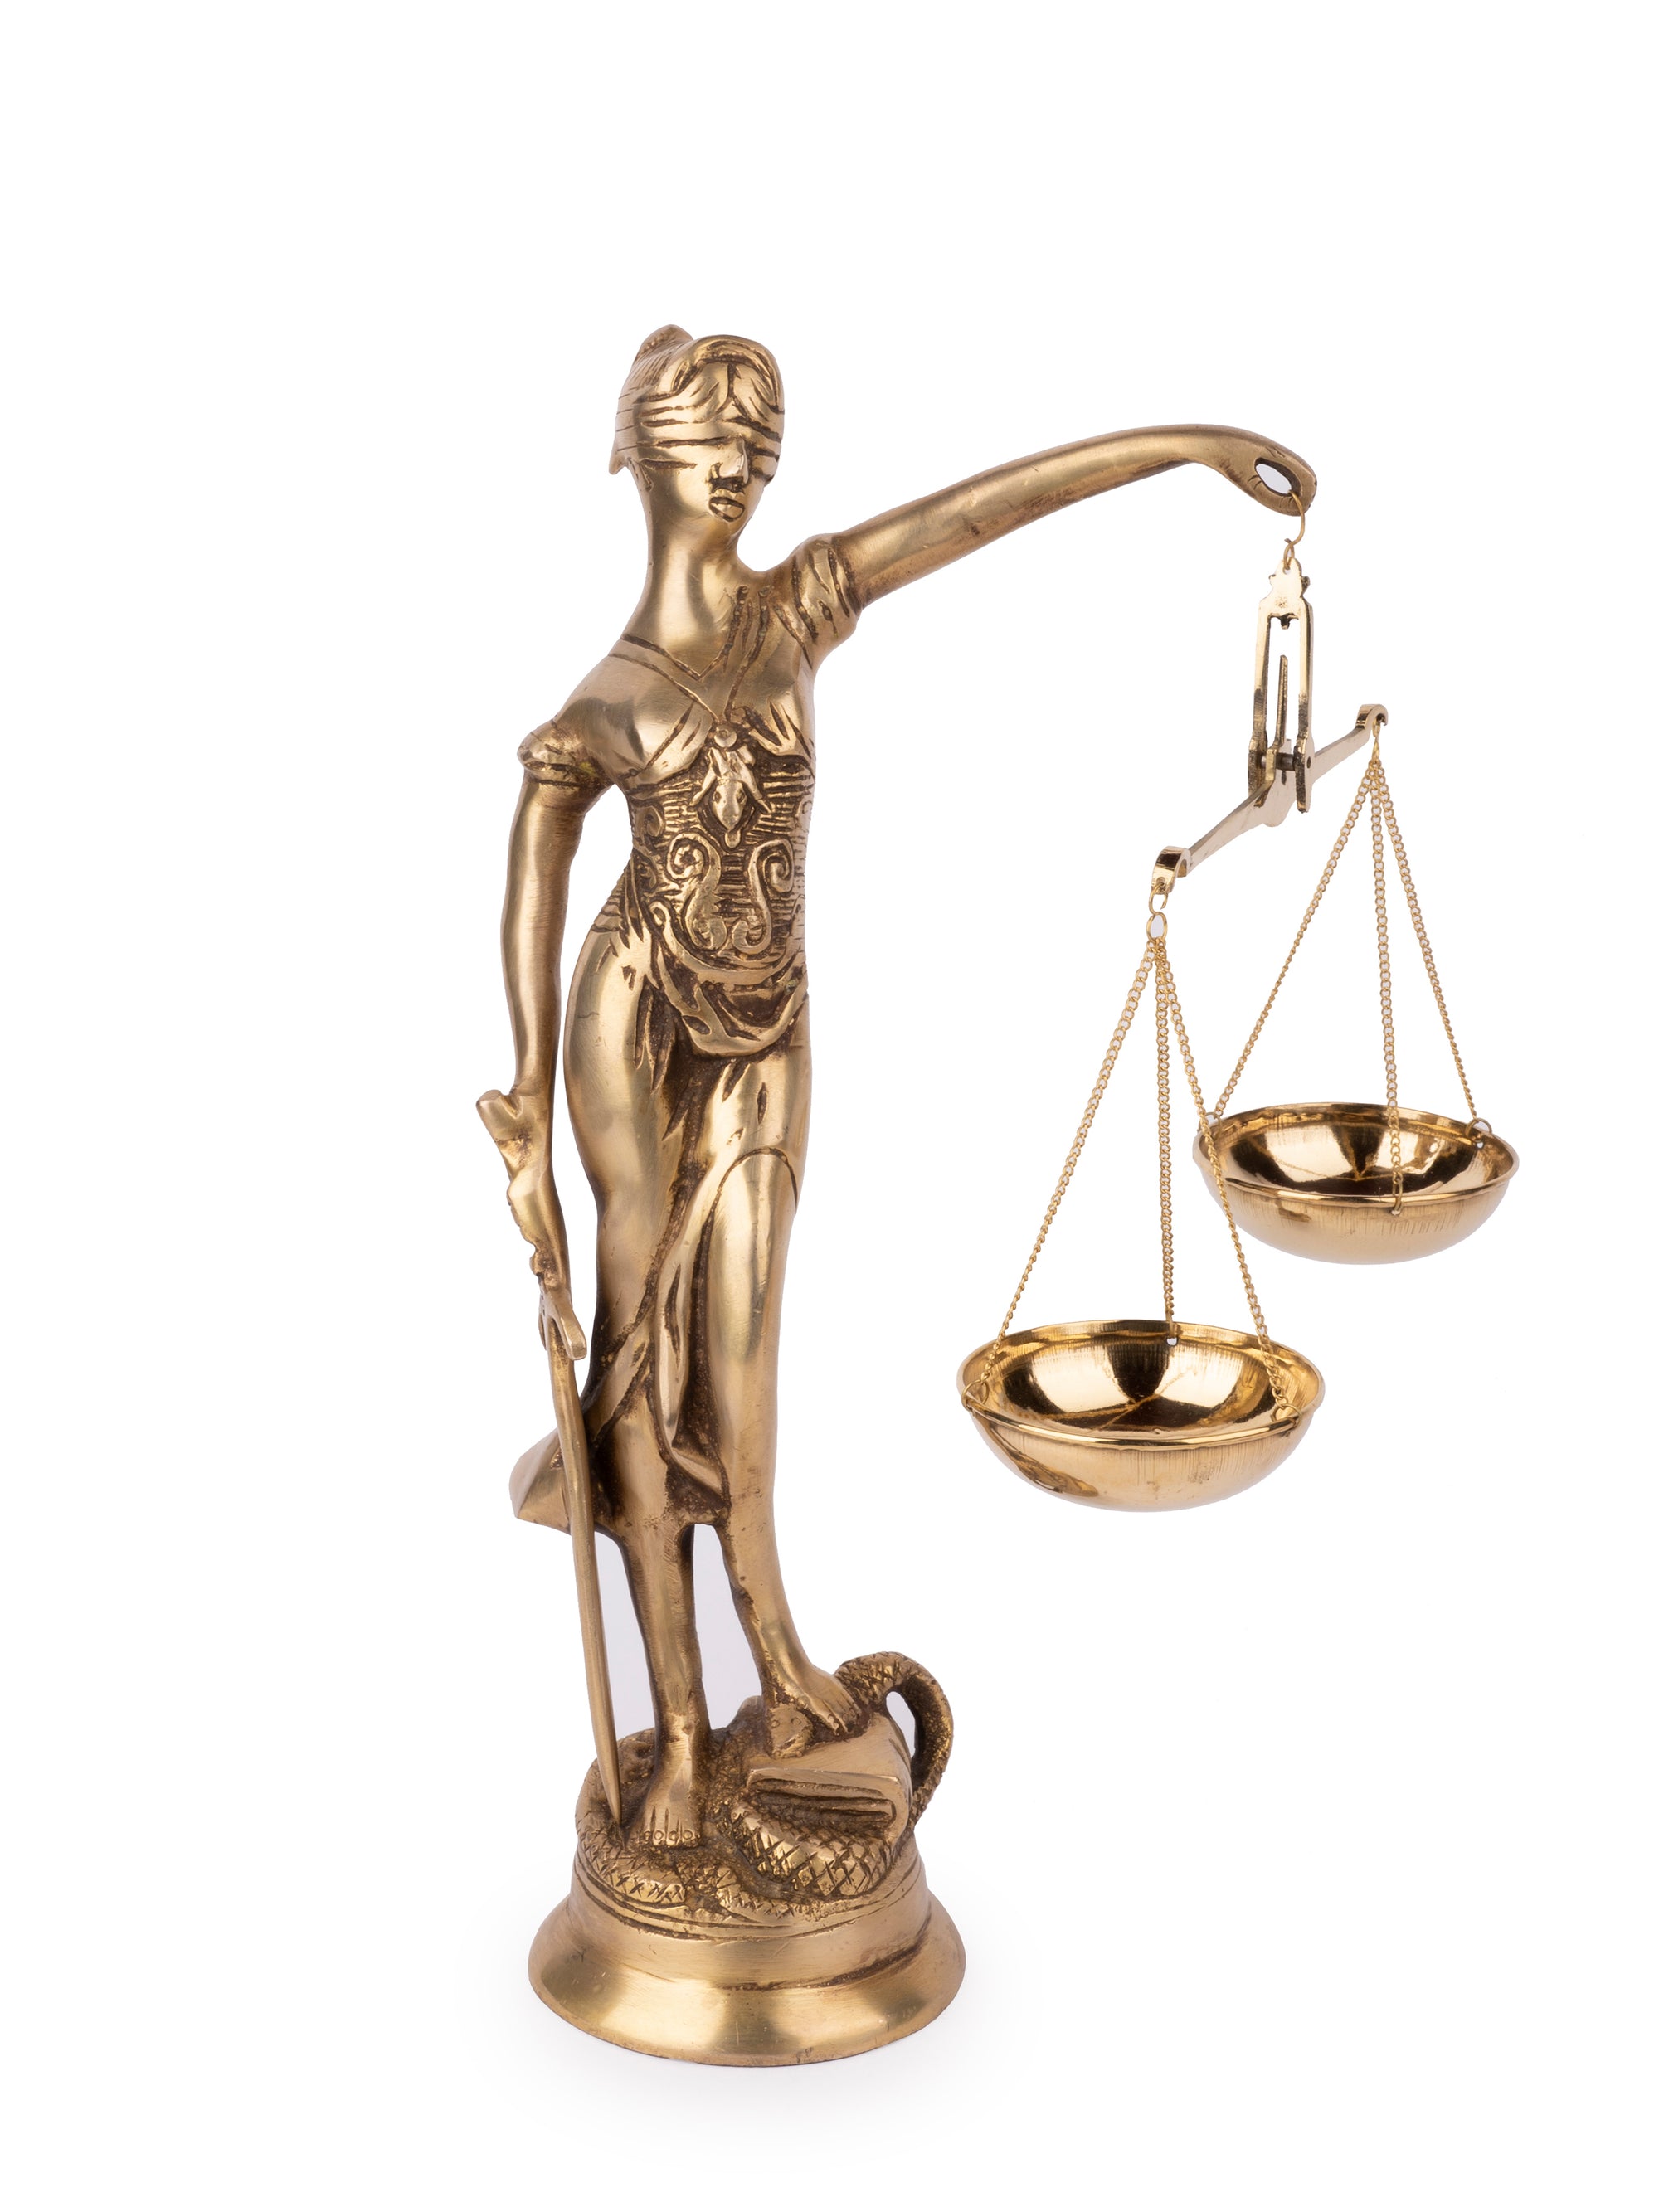 Themis Goddess of Justice Statue / Blind Folded Justice Lady - Made of Brass with antique finish - 14 inches height - The Heritage Artifacts